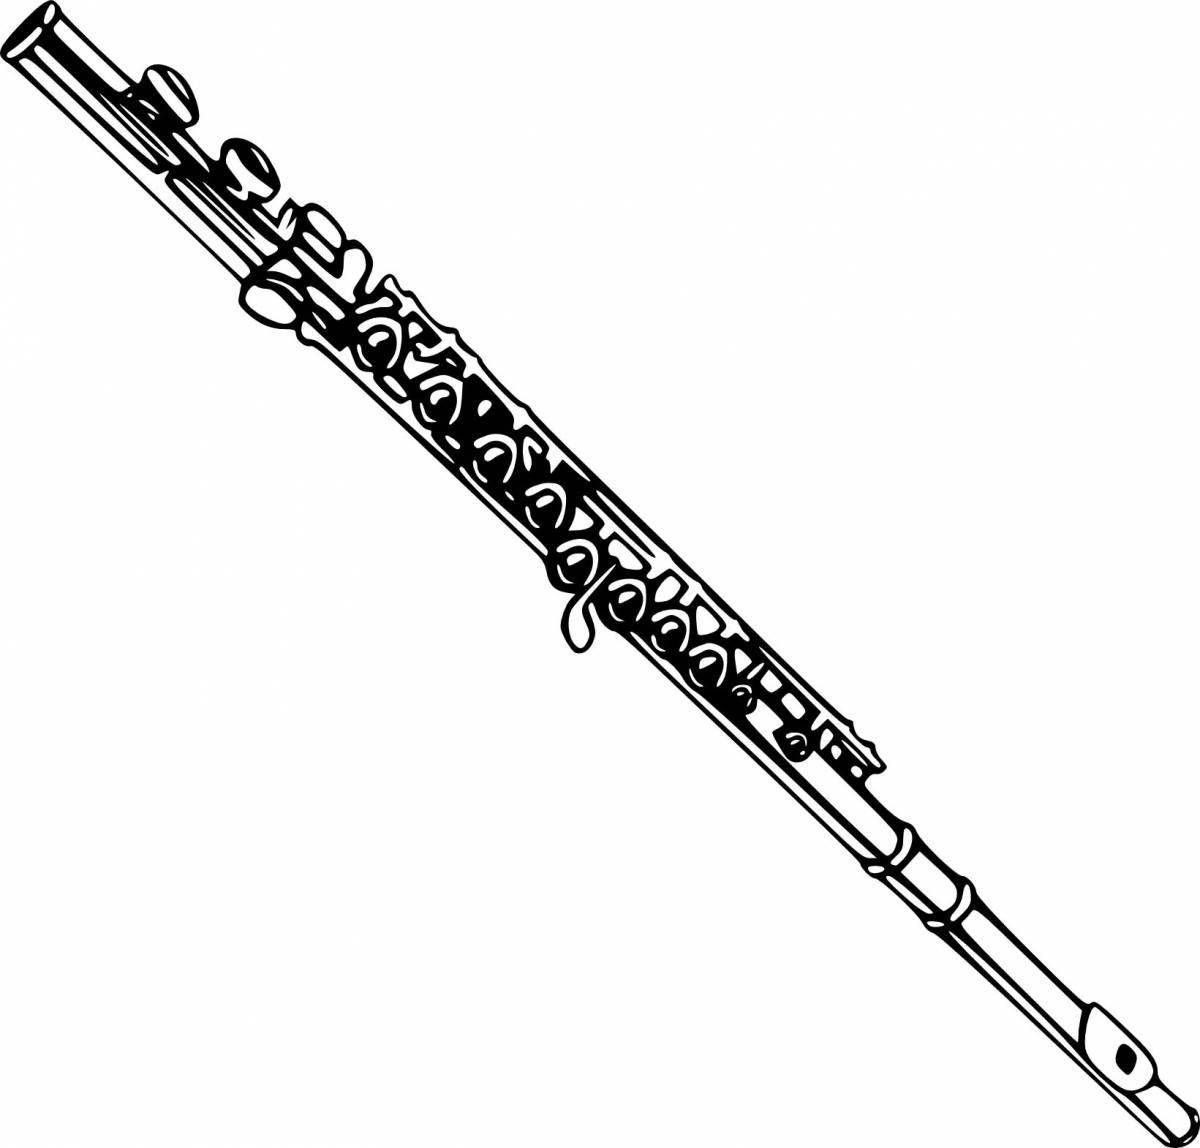 Radiant flute musical instrument coloring page